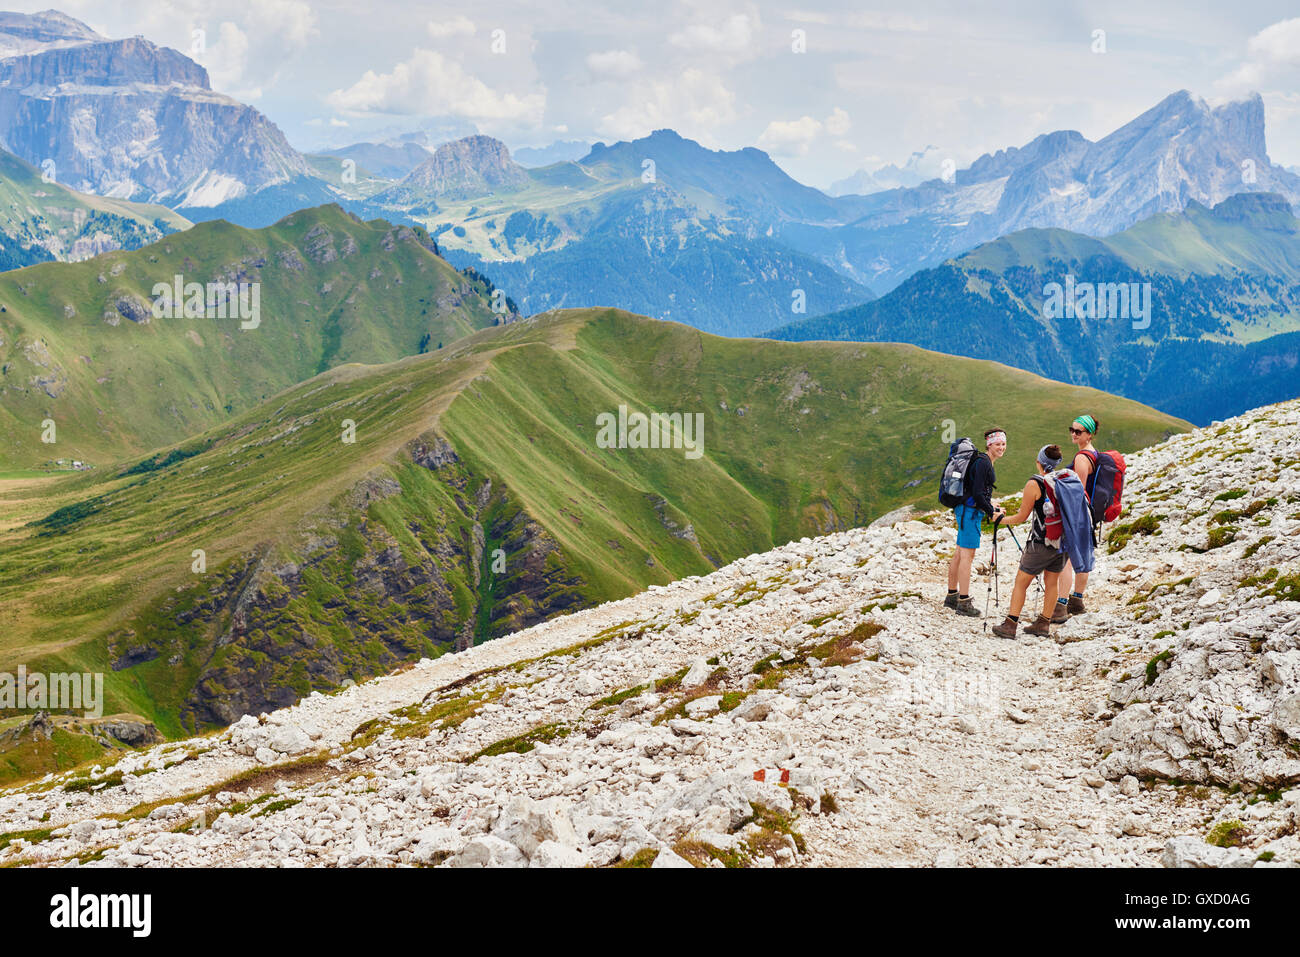 Scenic view of hikers on rocky mountainside, Austria Stock Photo